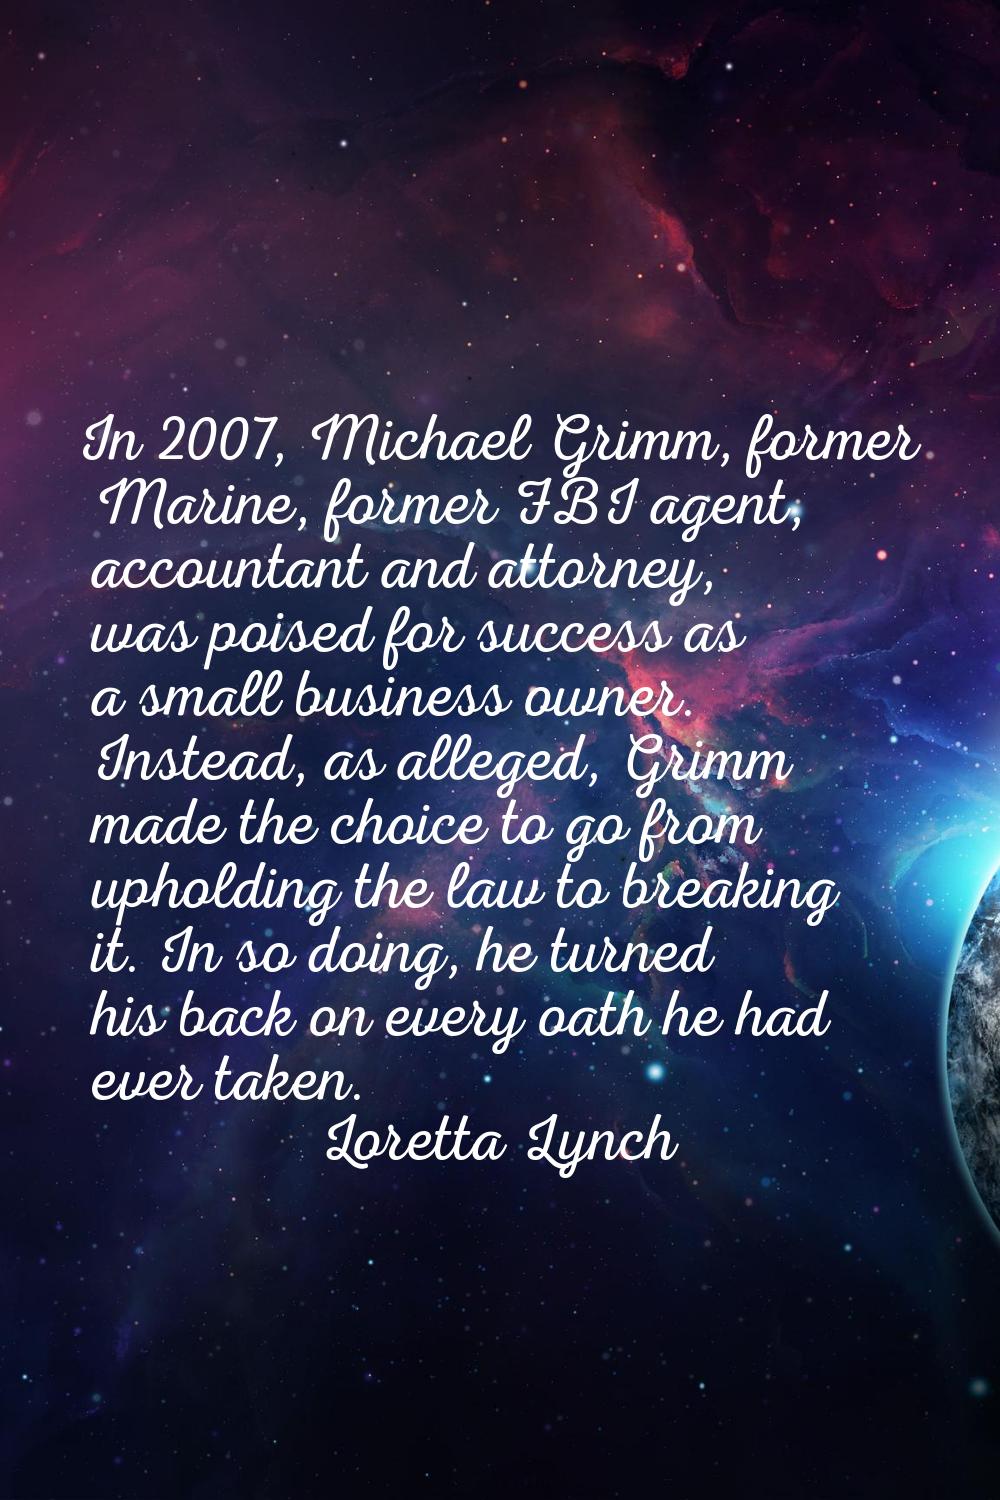 In 2007, Michael Grimm, former Marine, former FBI agent, accountant and attorney, was poised for su